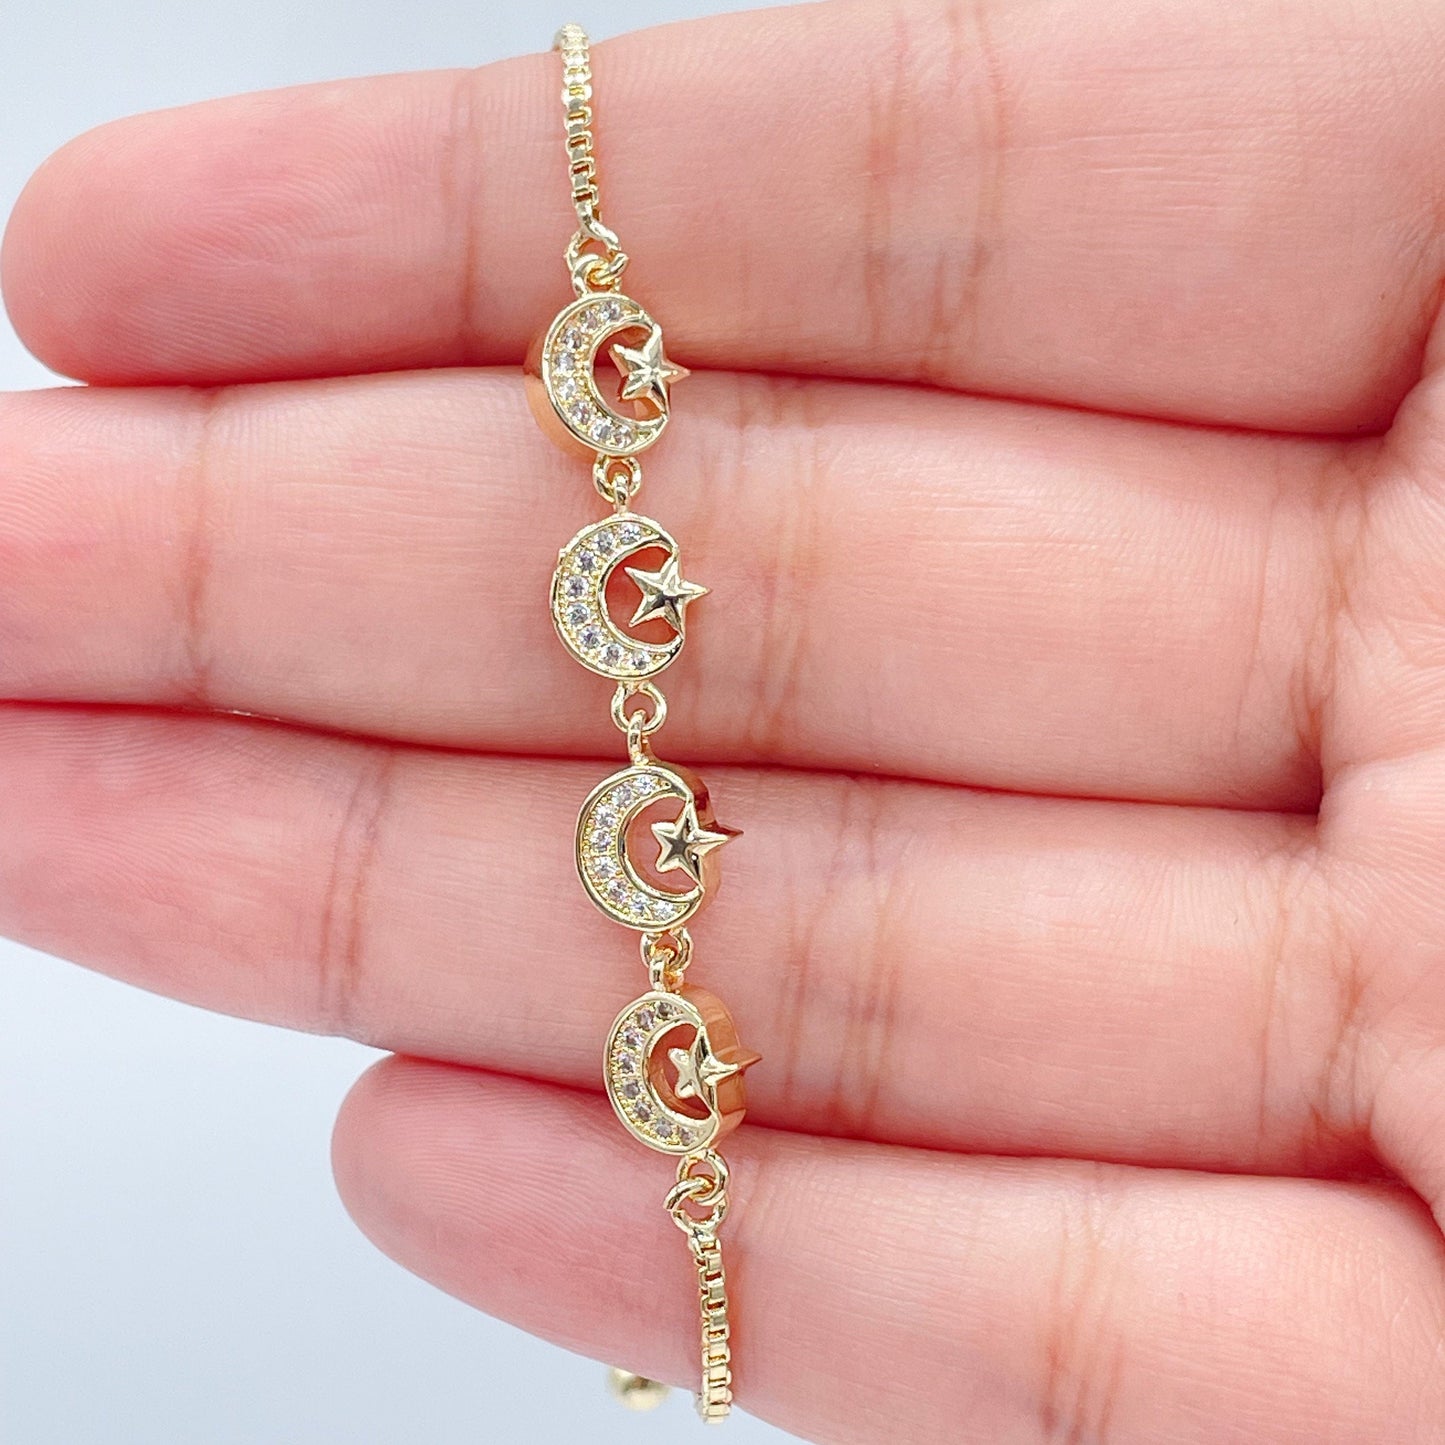 18k Gold Layered Moon and Star Adjustable Bracelet Featuring Cubic Zirconia,